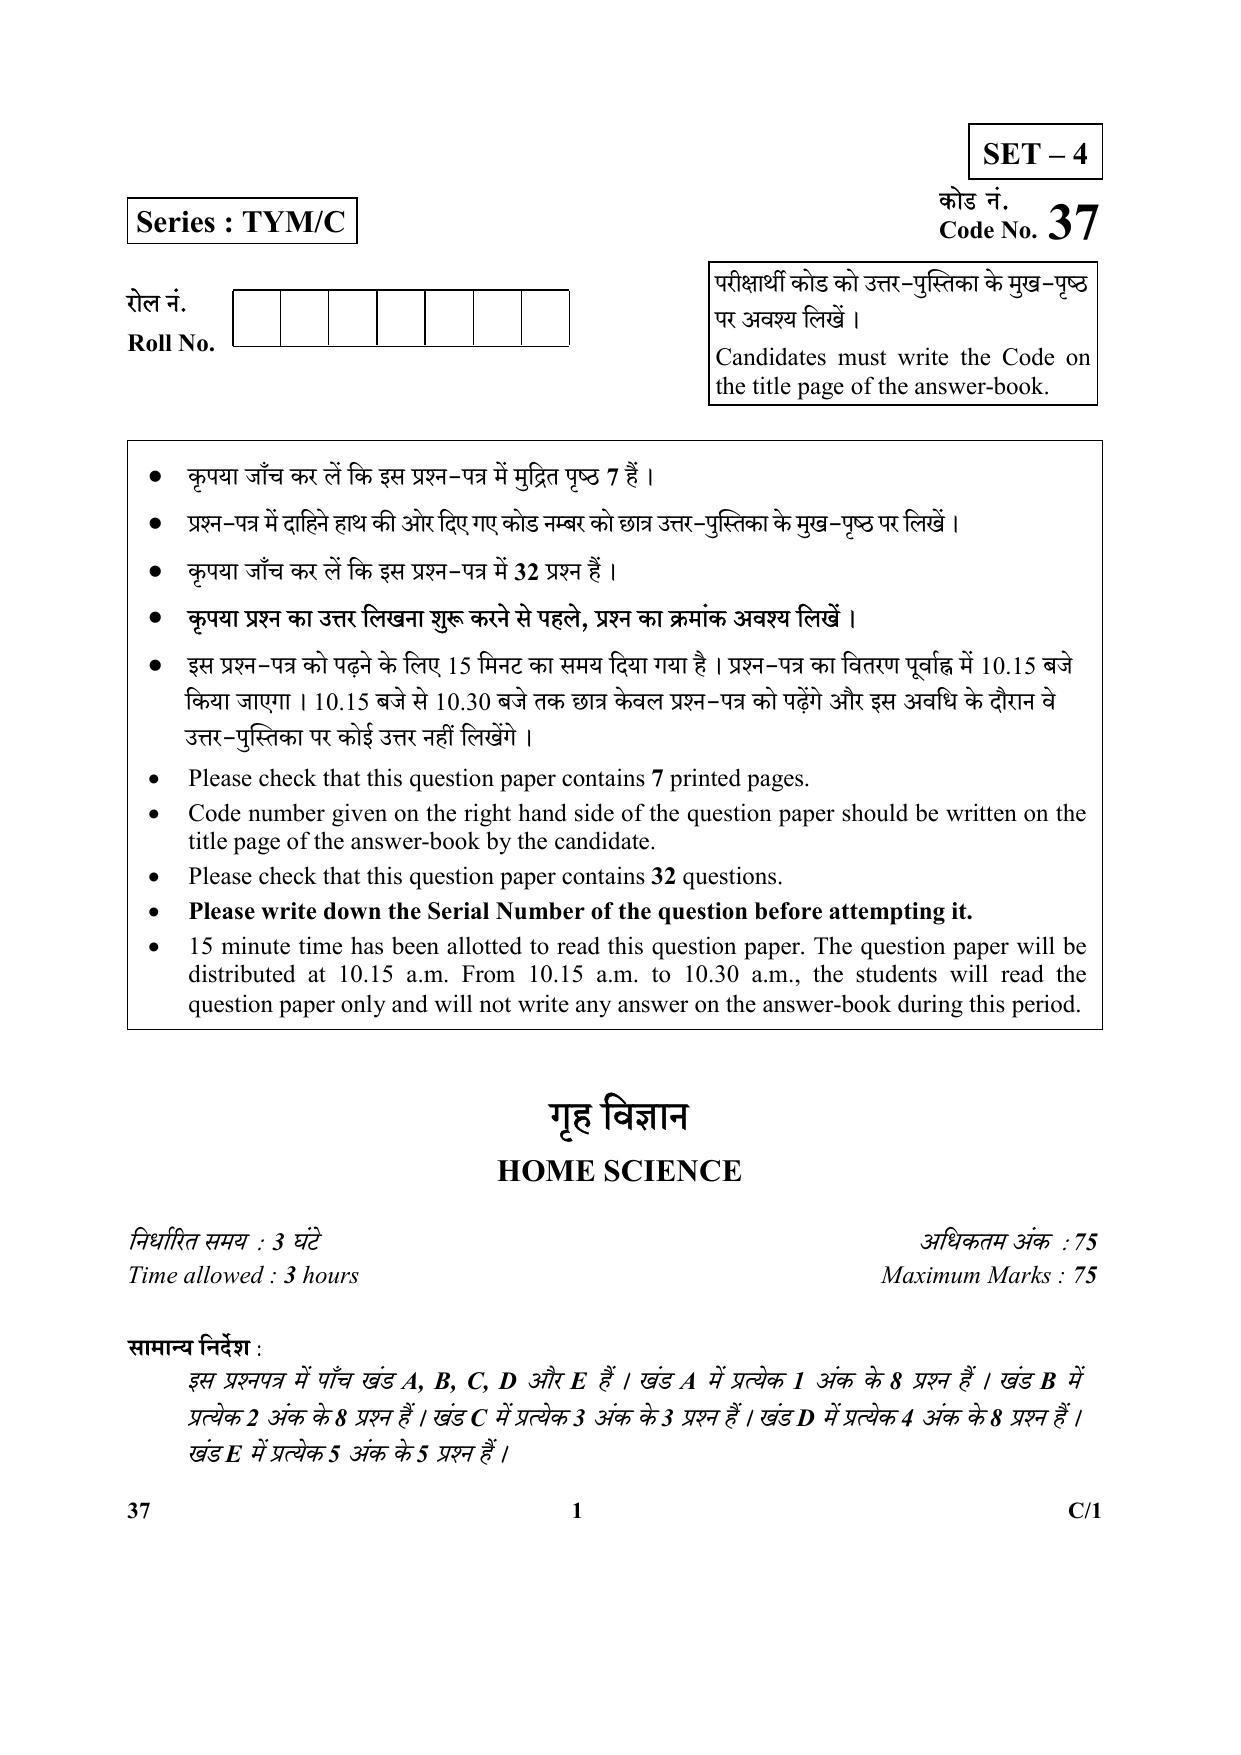 CBSE Class 10 37 (Home Science) 2018 Compartment Question Paper - Page 1